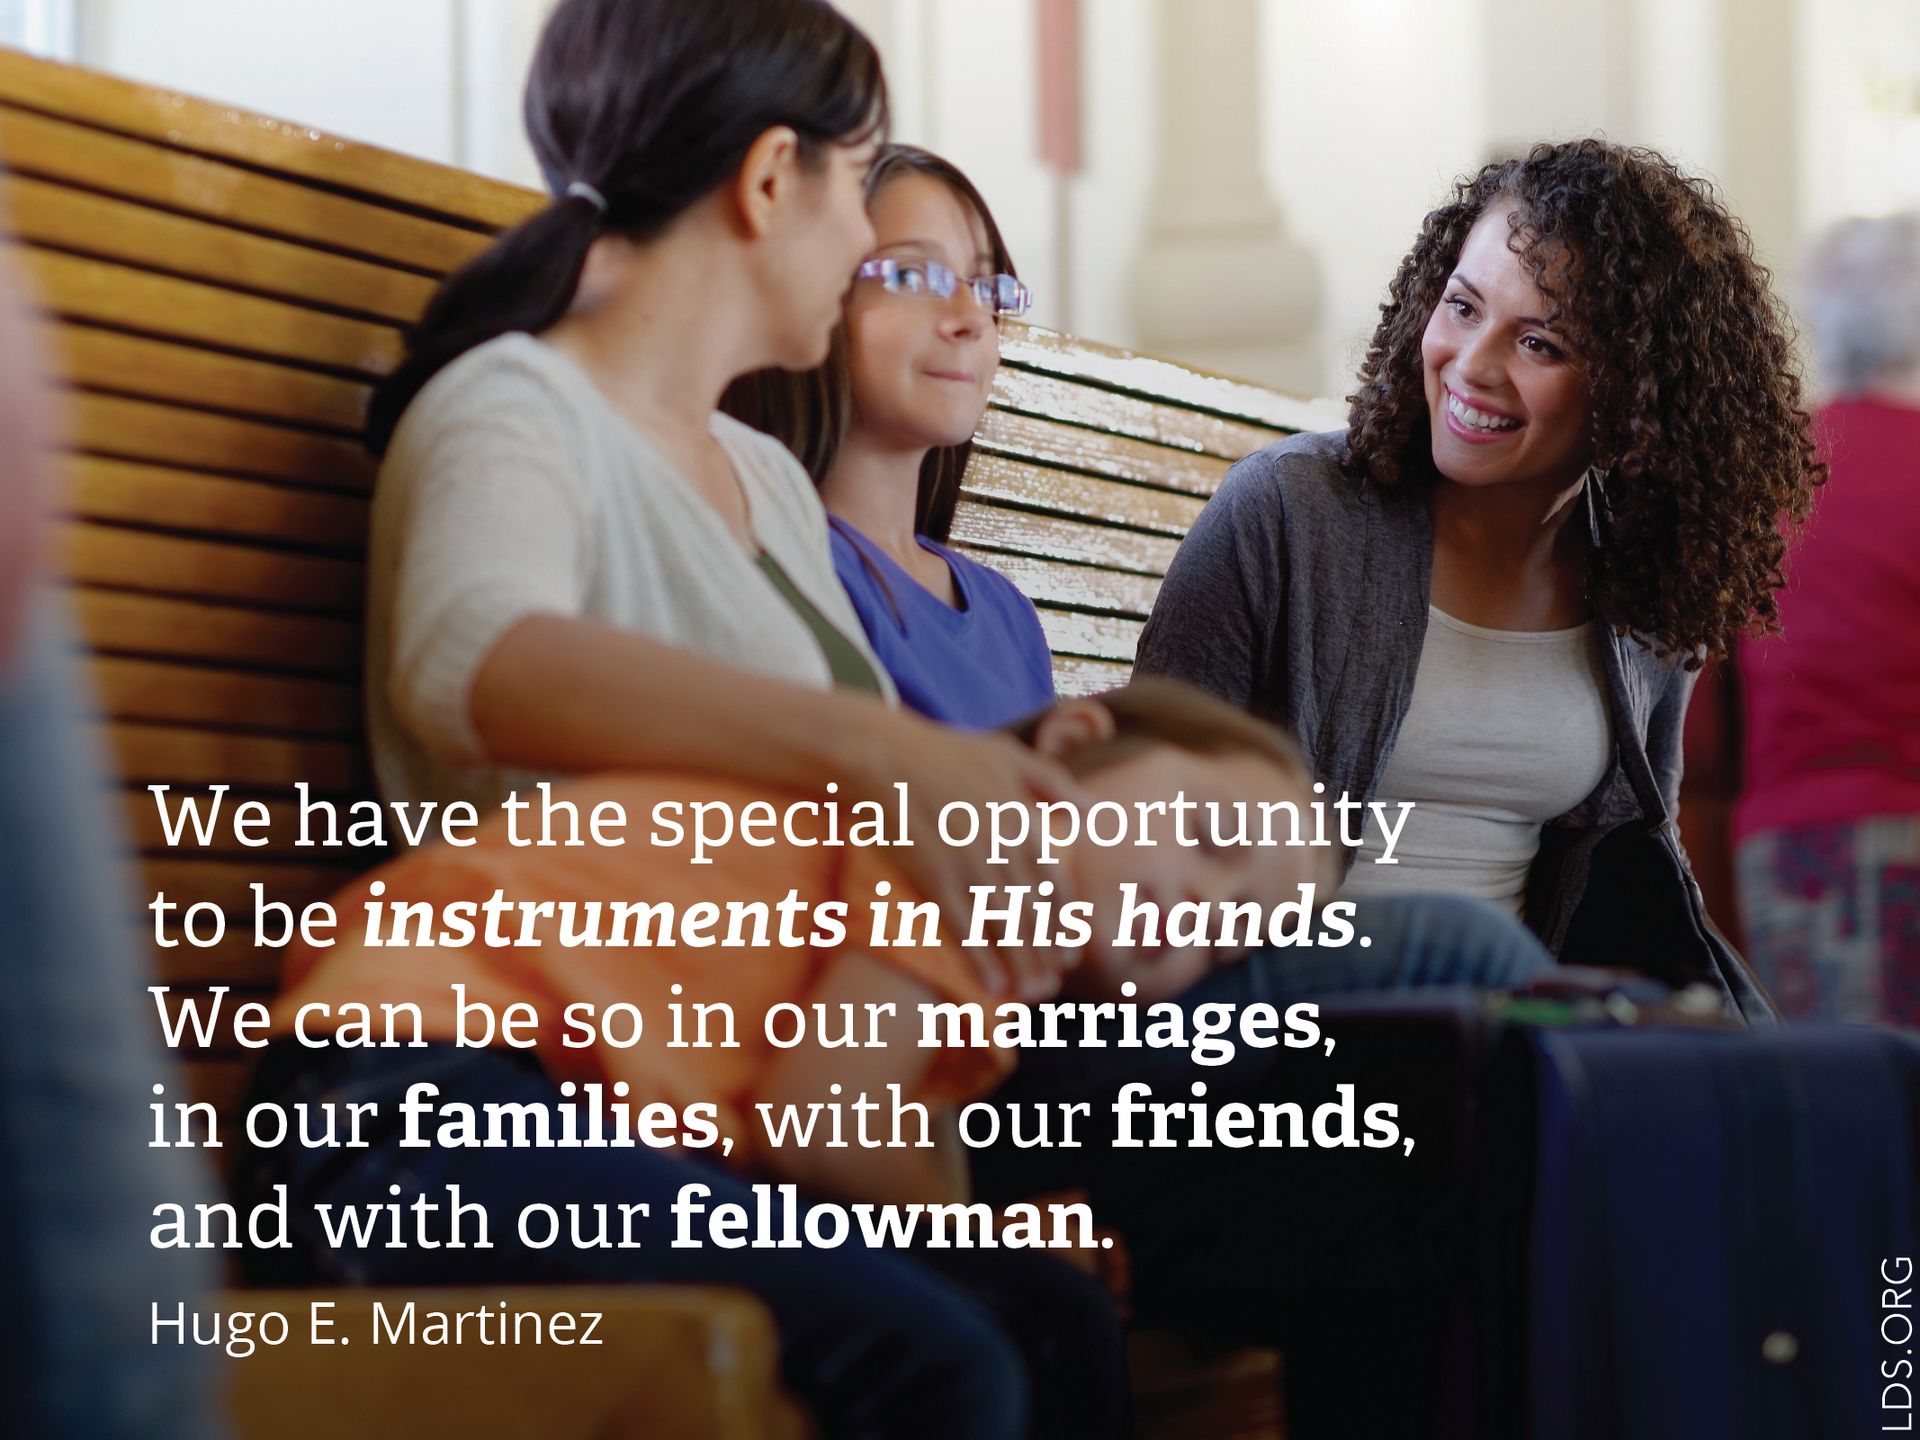 “We have the special opportunity to be instruments in His hands. We can be so in our marriages, in our families, with our friends, and with our fellowman.”—Elder Hugo E. Martinez, “Our Personal Ministries”